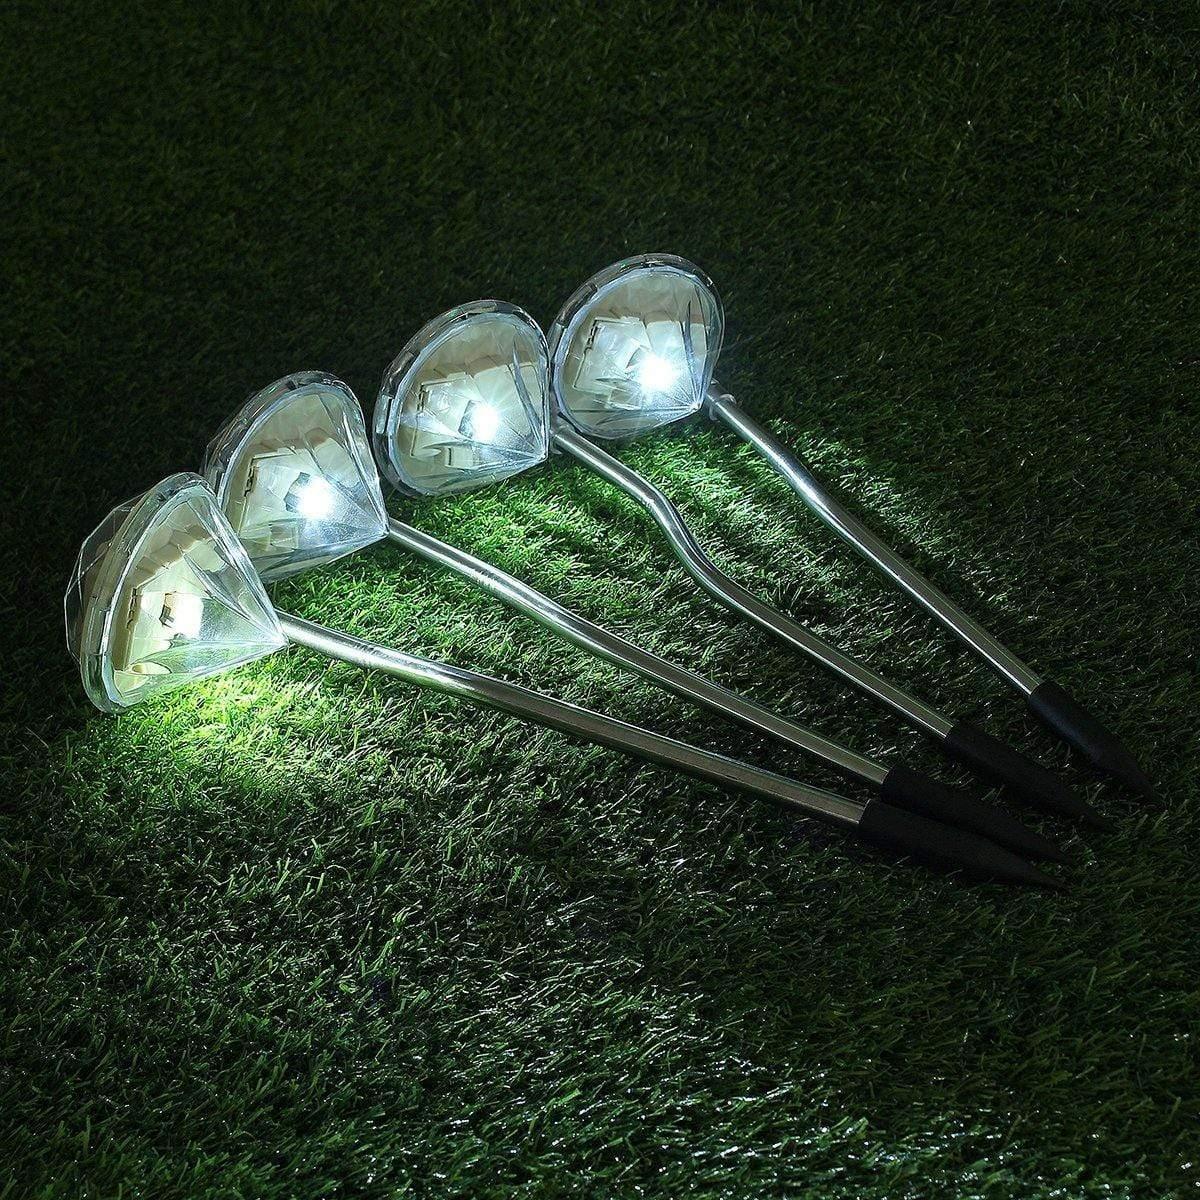 ezy2find solar White 4Packs Solar Garden Lights Outdoor LED Solar Powered Pathway Lights Stainless Steel Landscape Lighting for Lawn Patio Yard Walkway Driveway